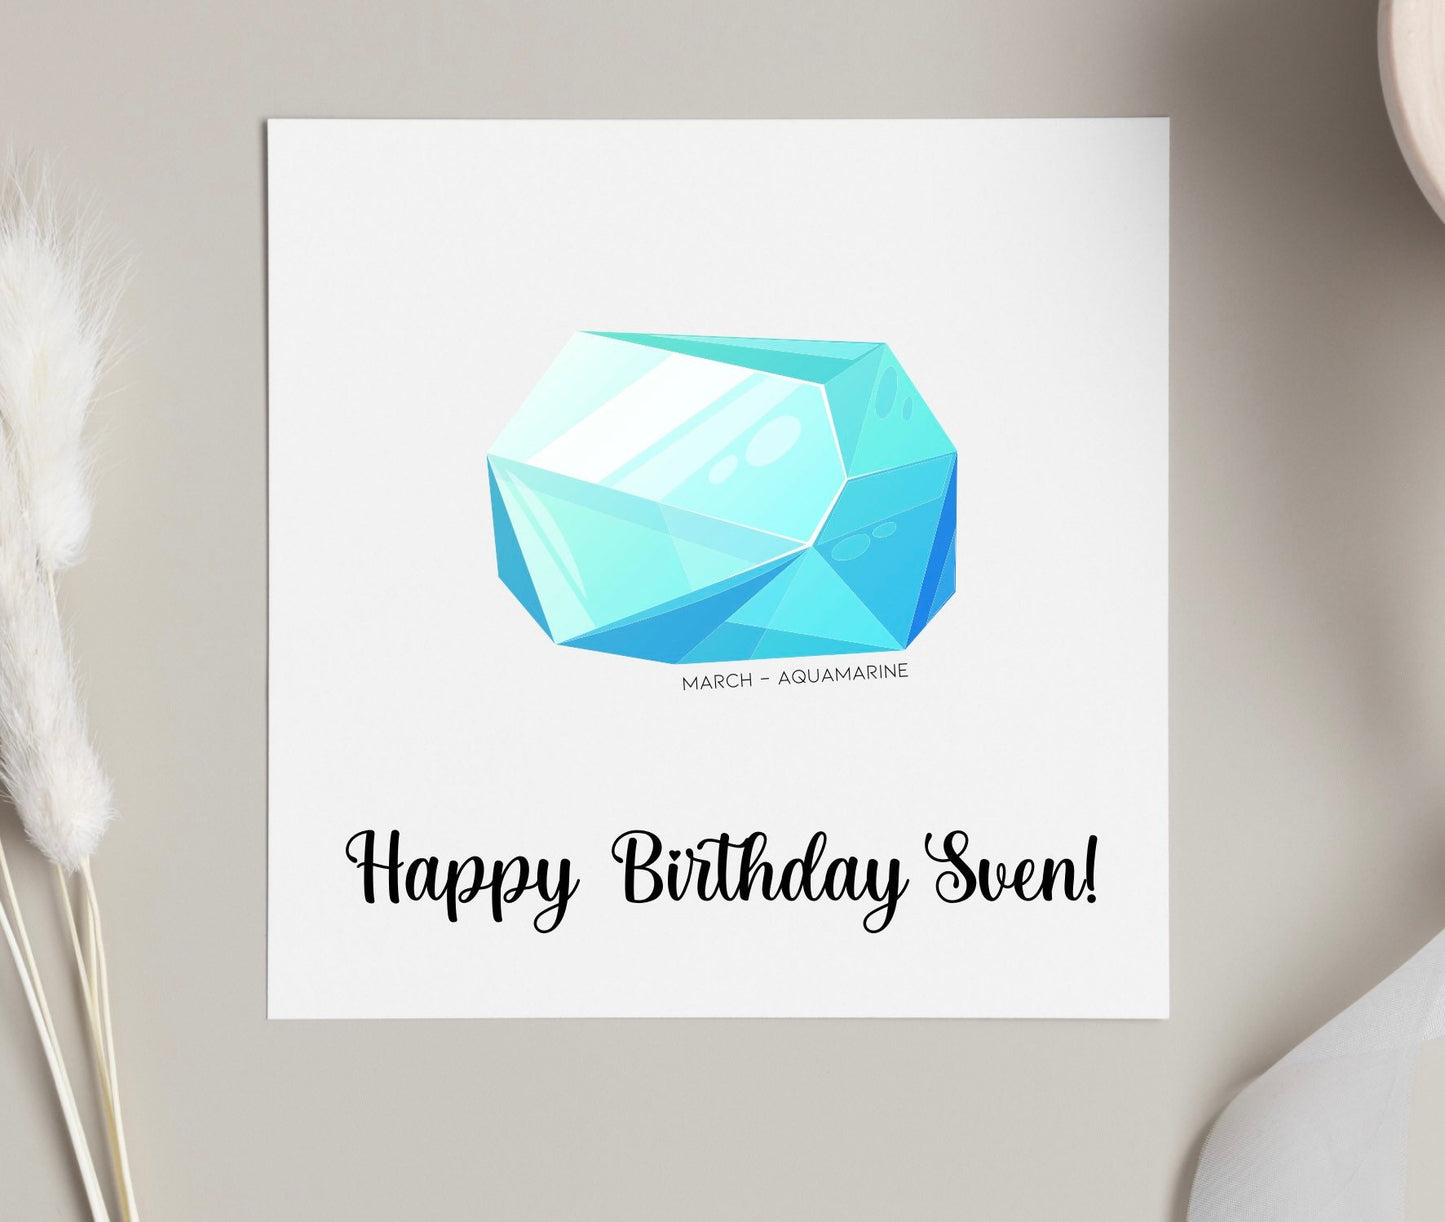 Birthstone birthday card, gemstone birth month card, personalise bday card for her, friends and family bday cards